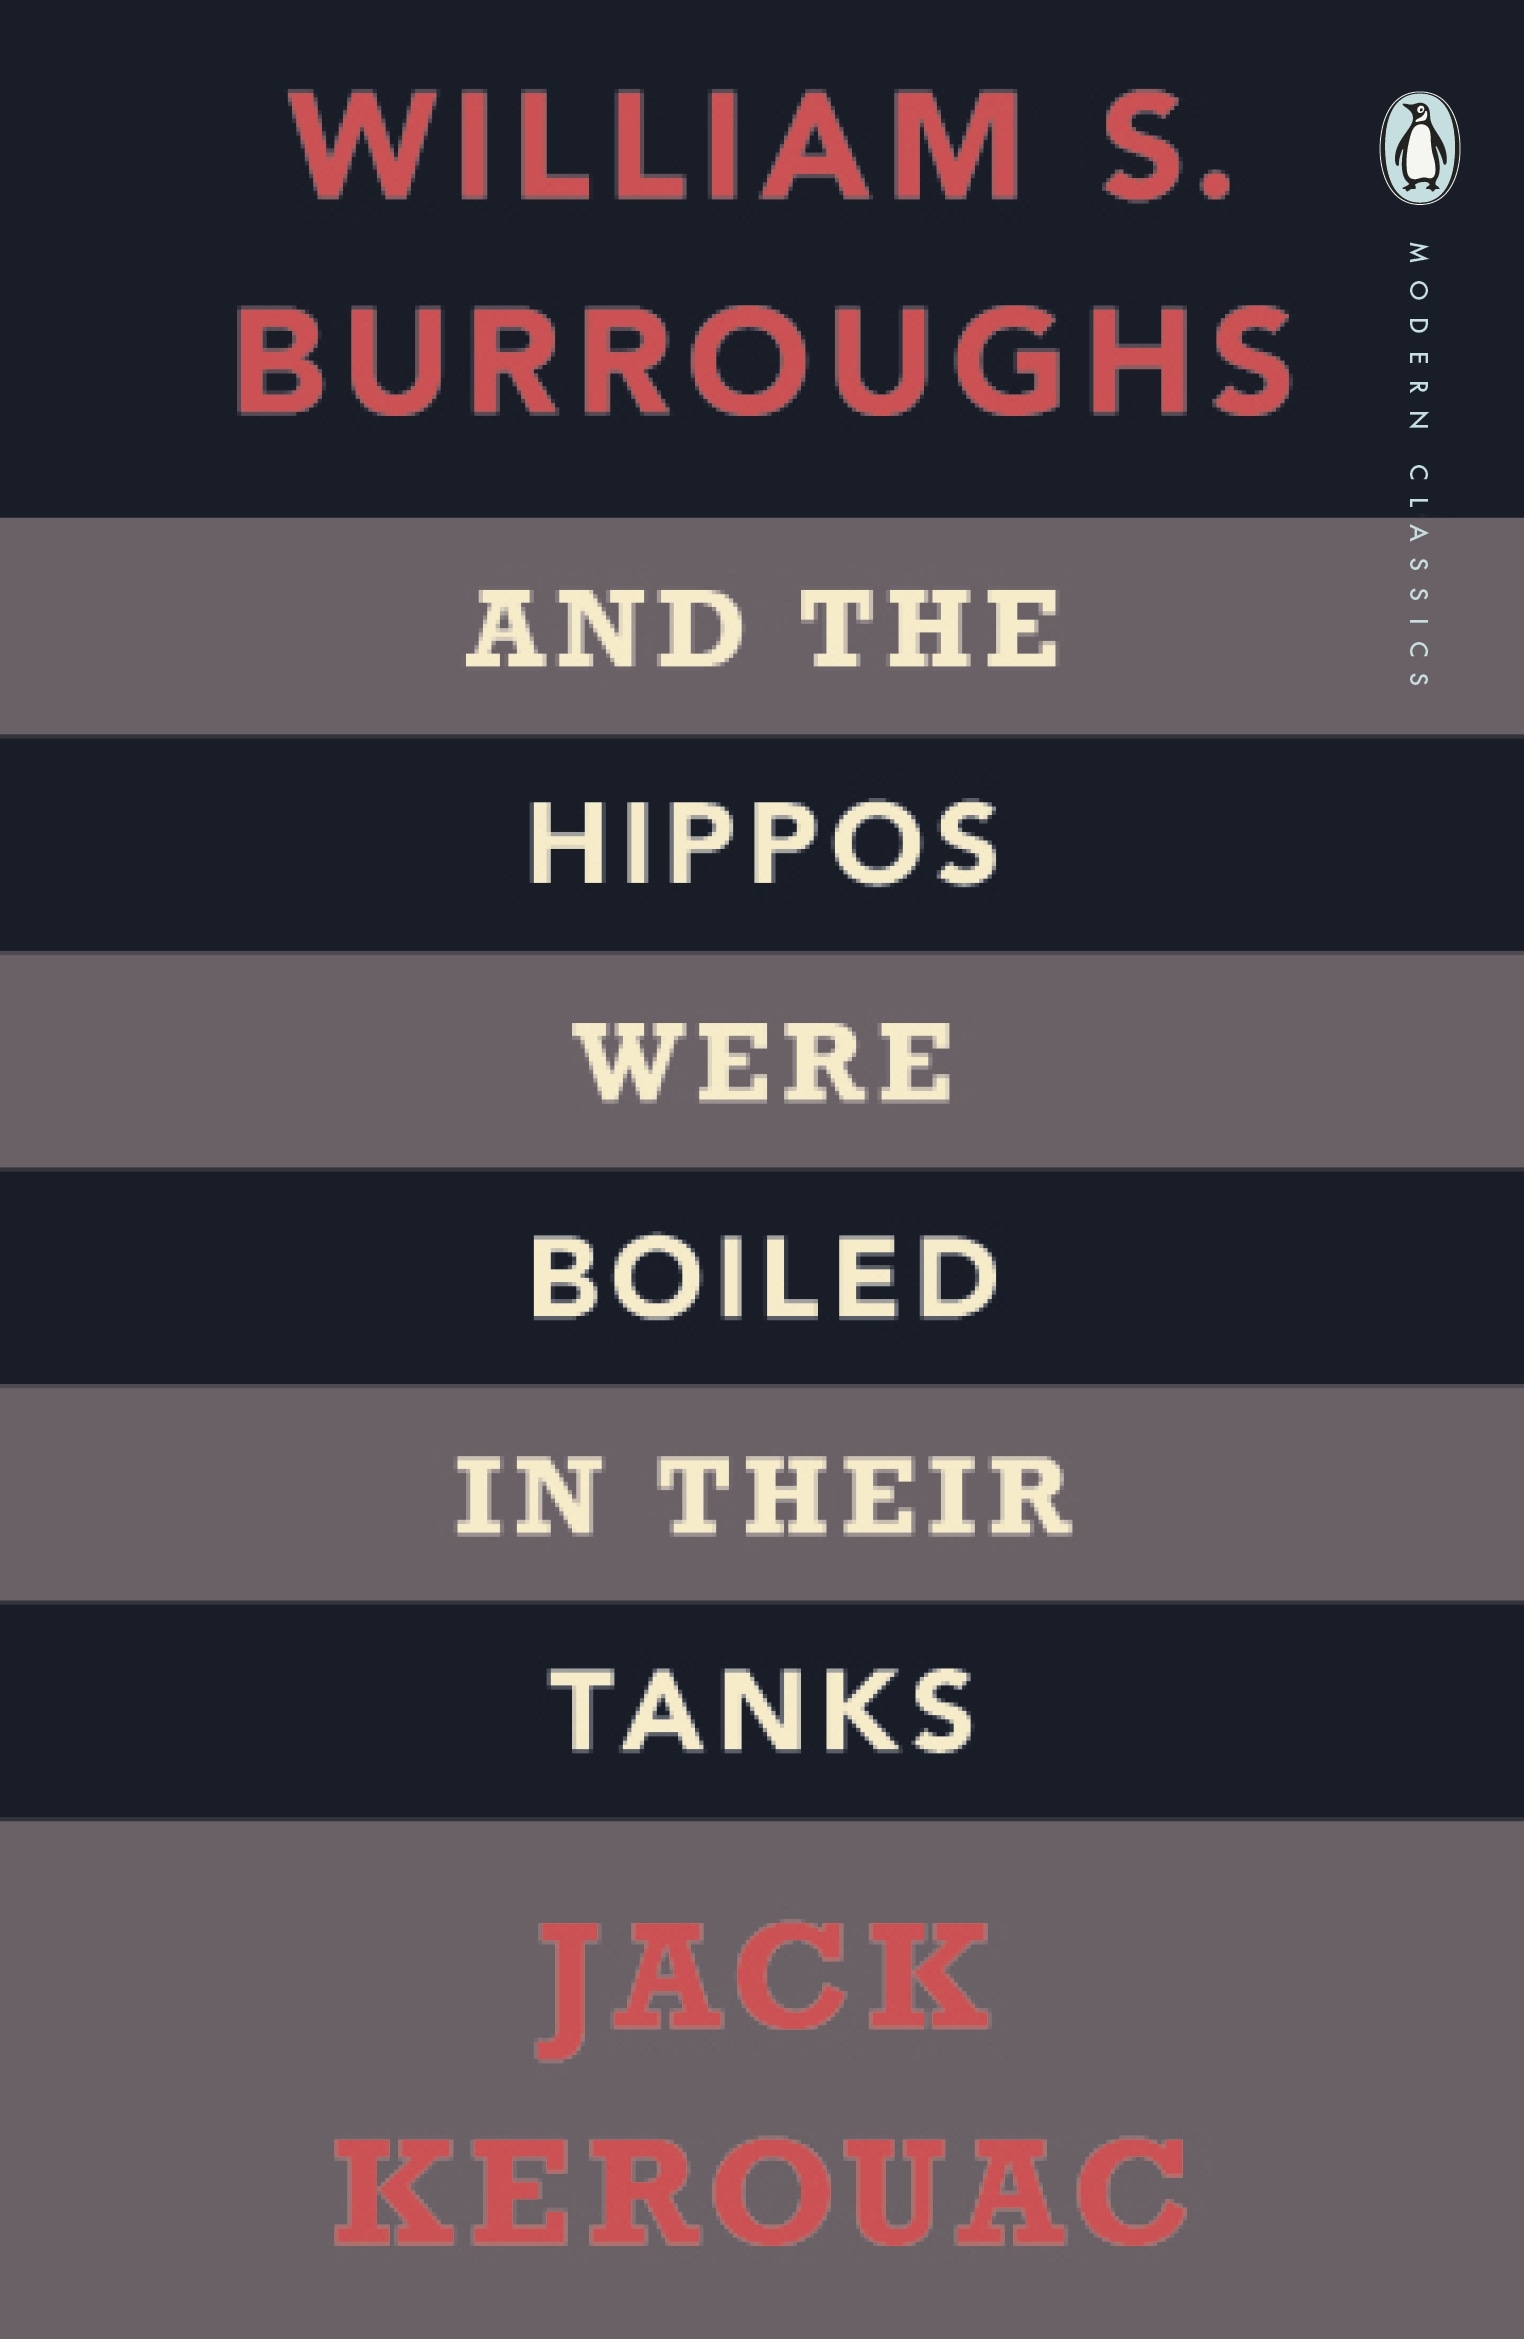 Book “And the Hippos Were Boiled in Their Tanks” by Jack Kerouac, William S. Burroughs — August 6, 2009